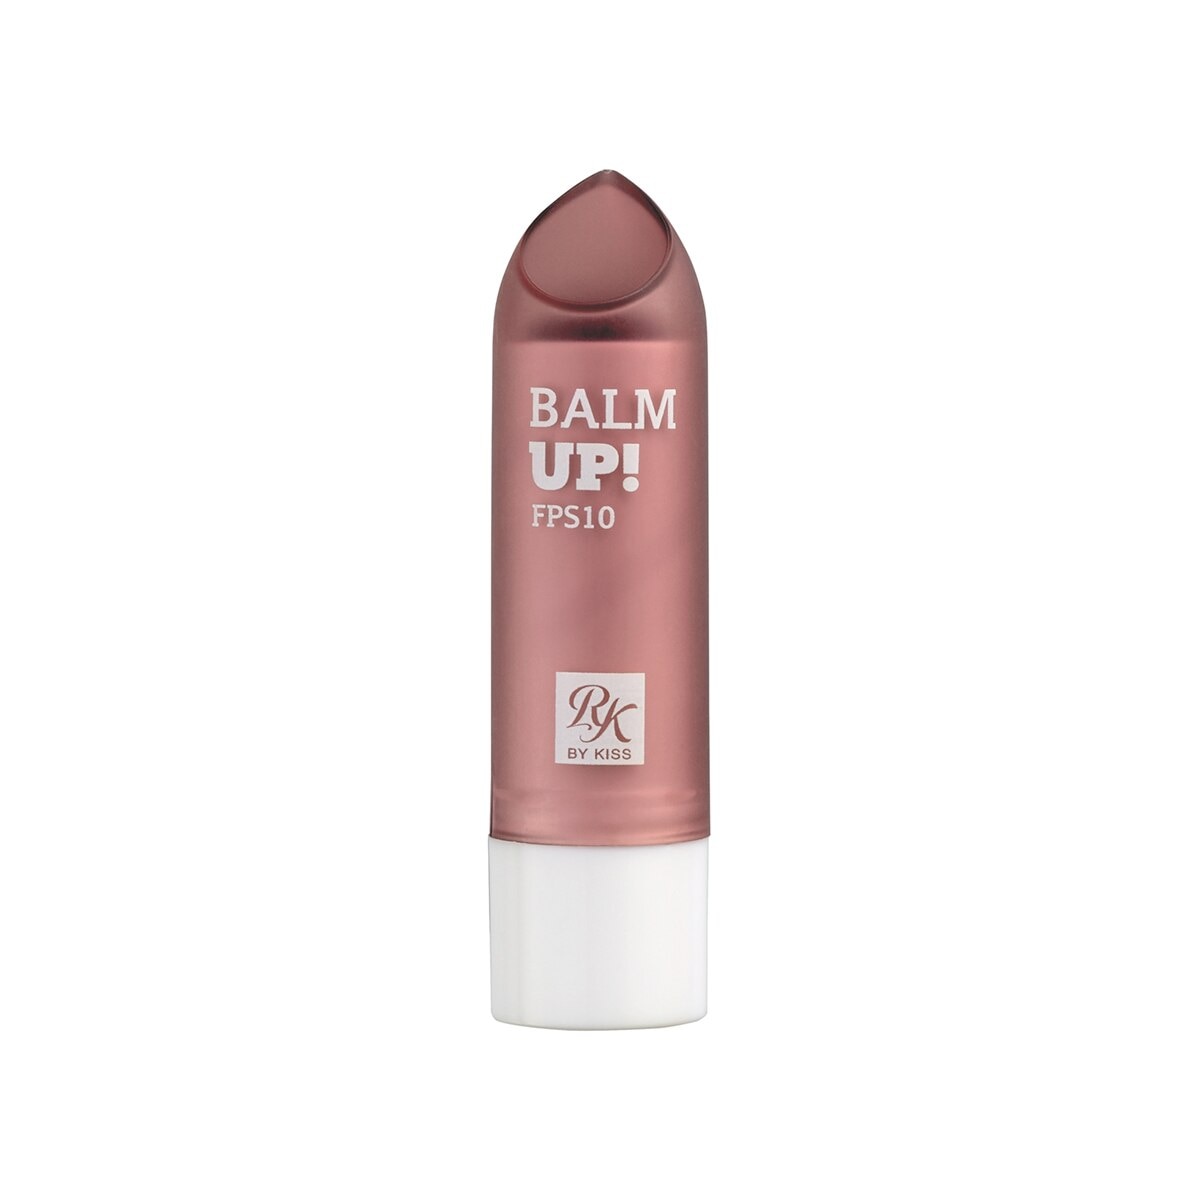 Protetor Labial Balm Up! RK by Kiss Dress Up FPS10 Cor 06 4g